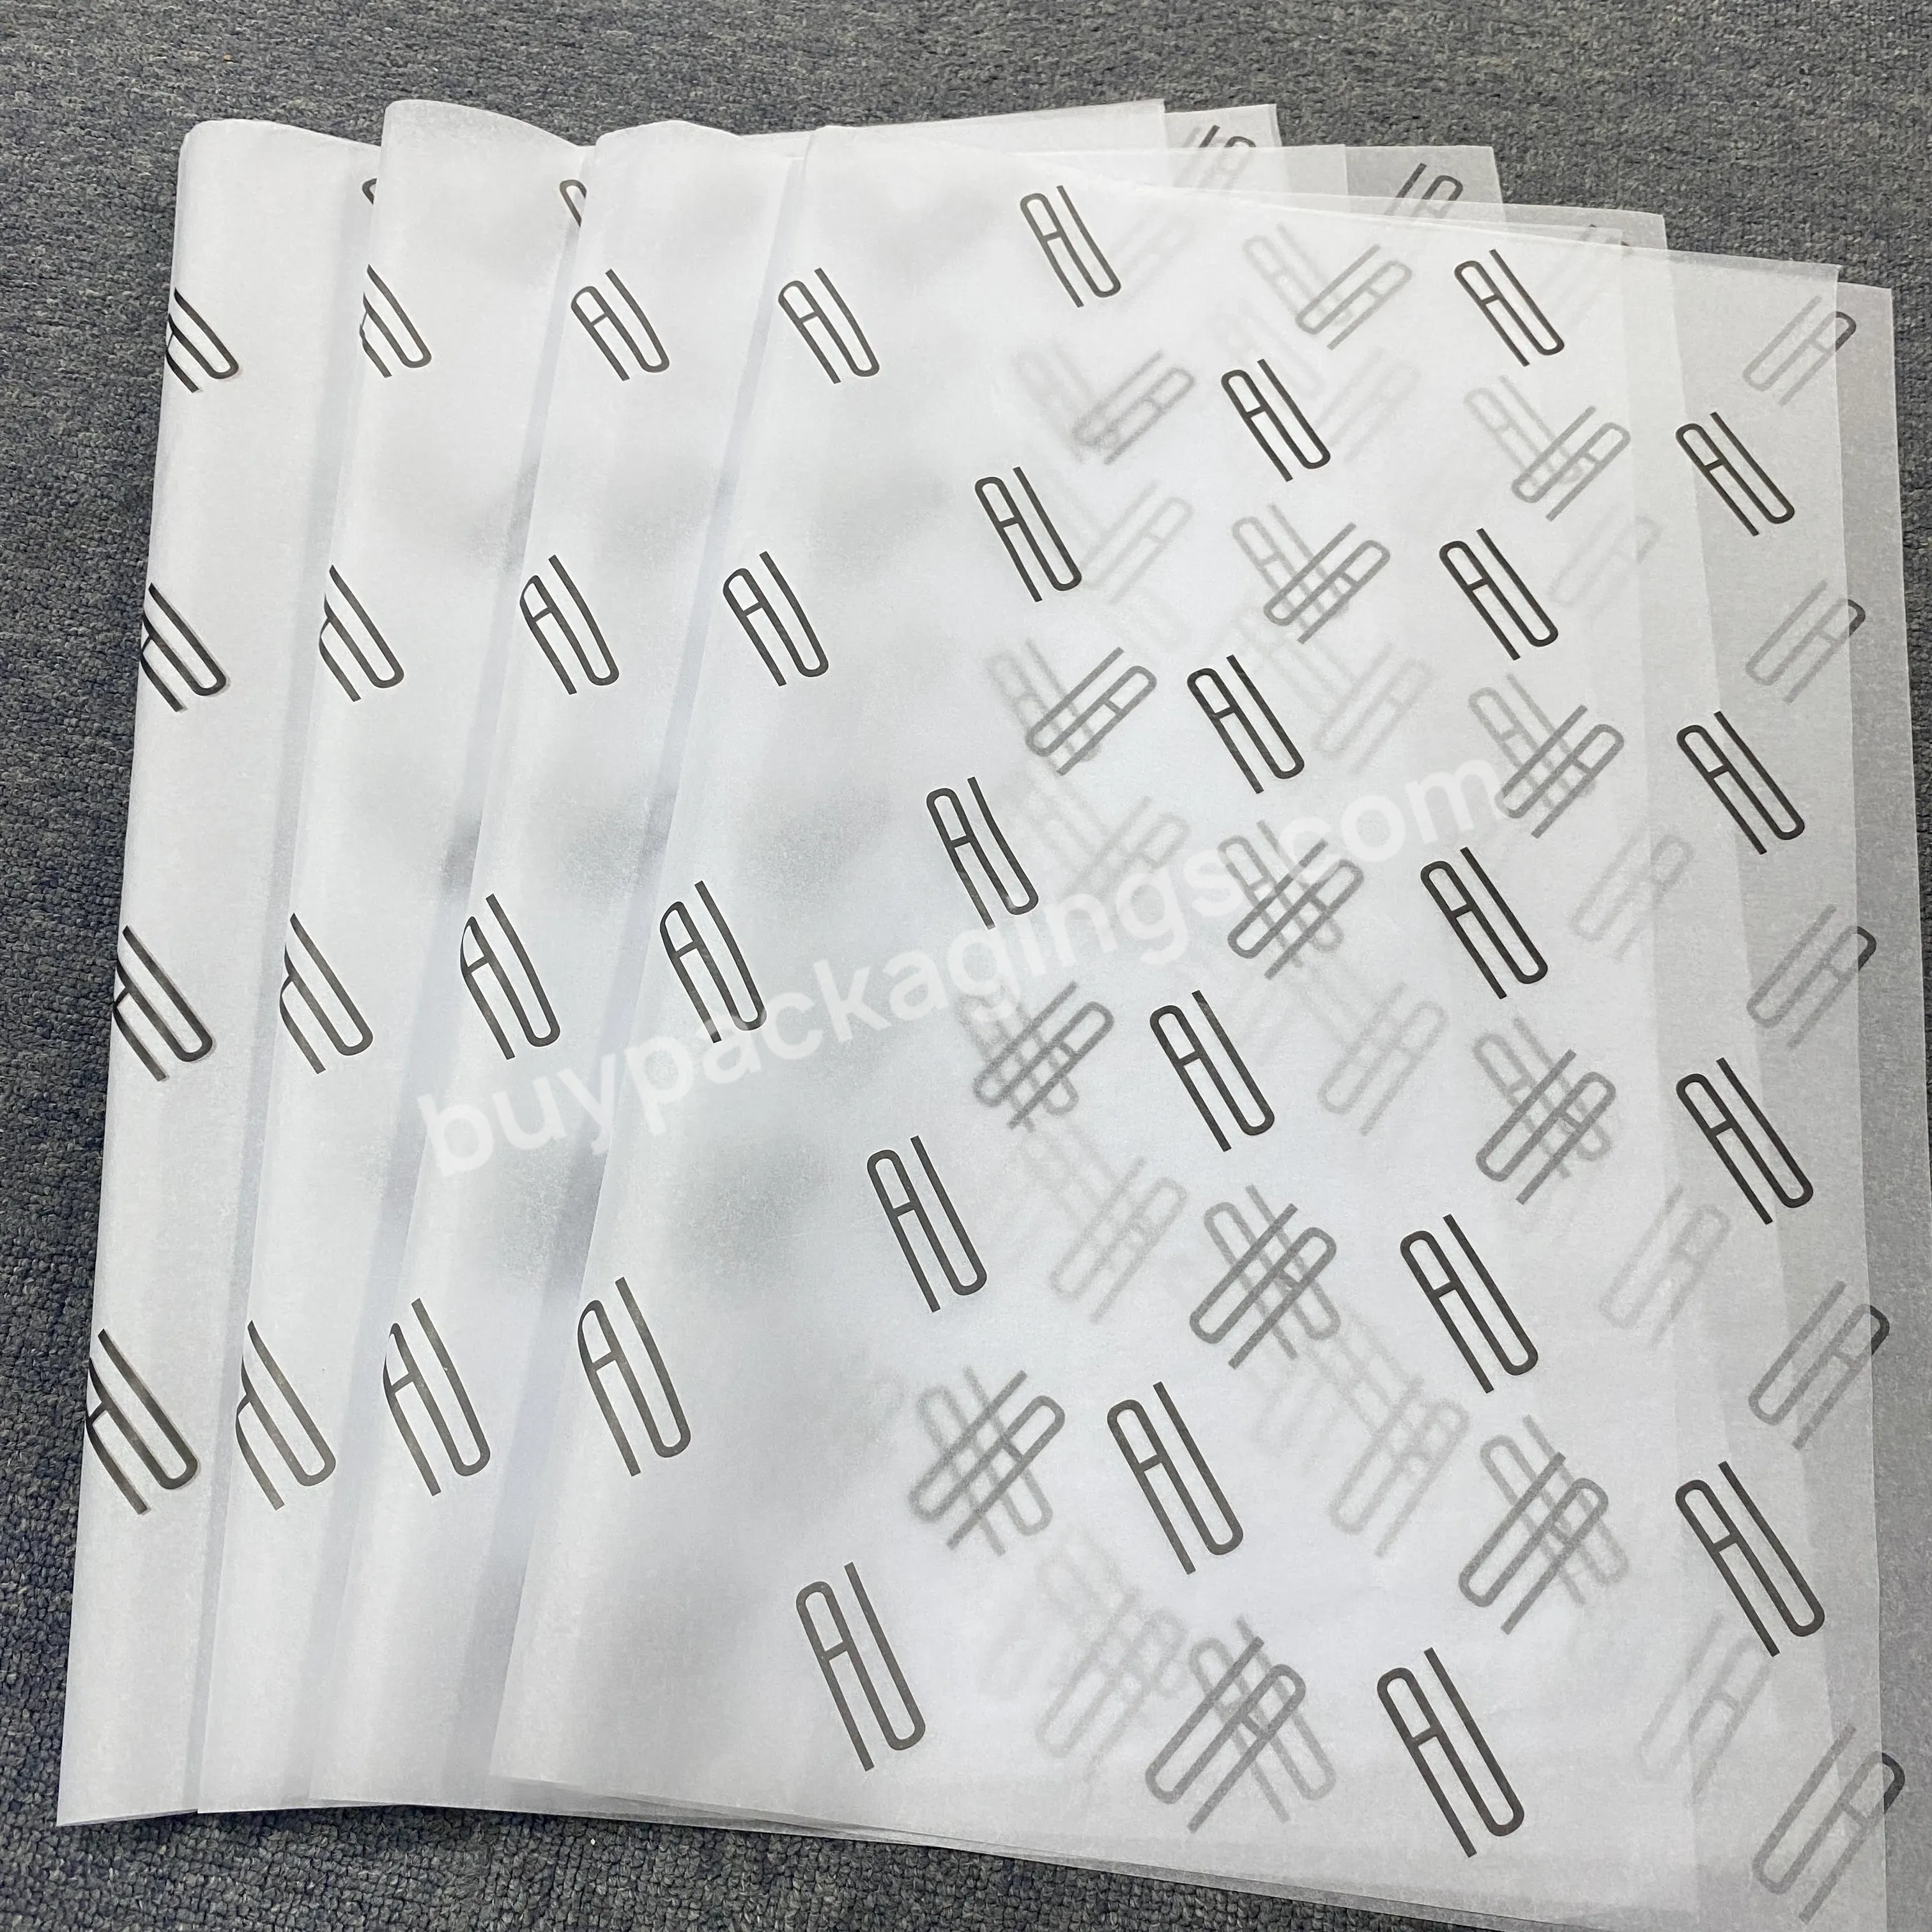 Custom Wholesale High Quality Best Price Stylish Printed Logo Design Tissue Wrapping Packaging Paper - Buy Wrapping Flowers And Clothing,Moq Is 50 Pcs,Customized Logo And Size.